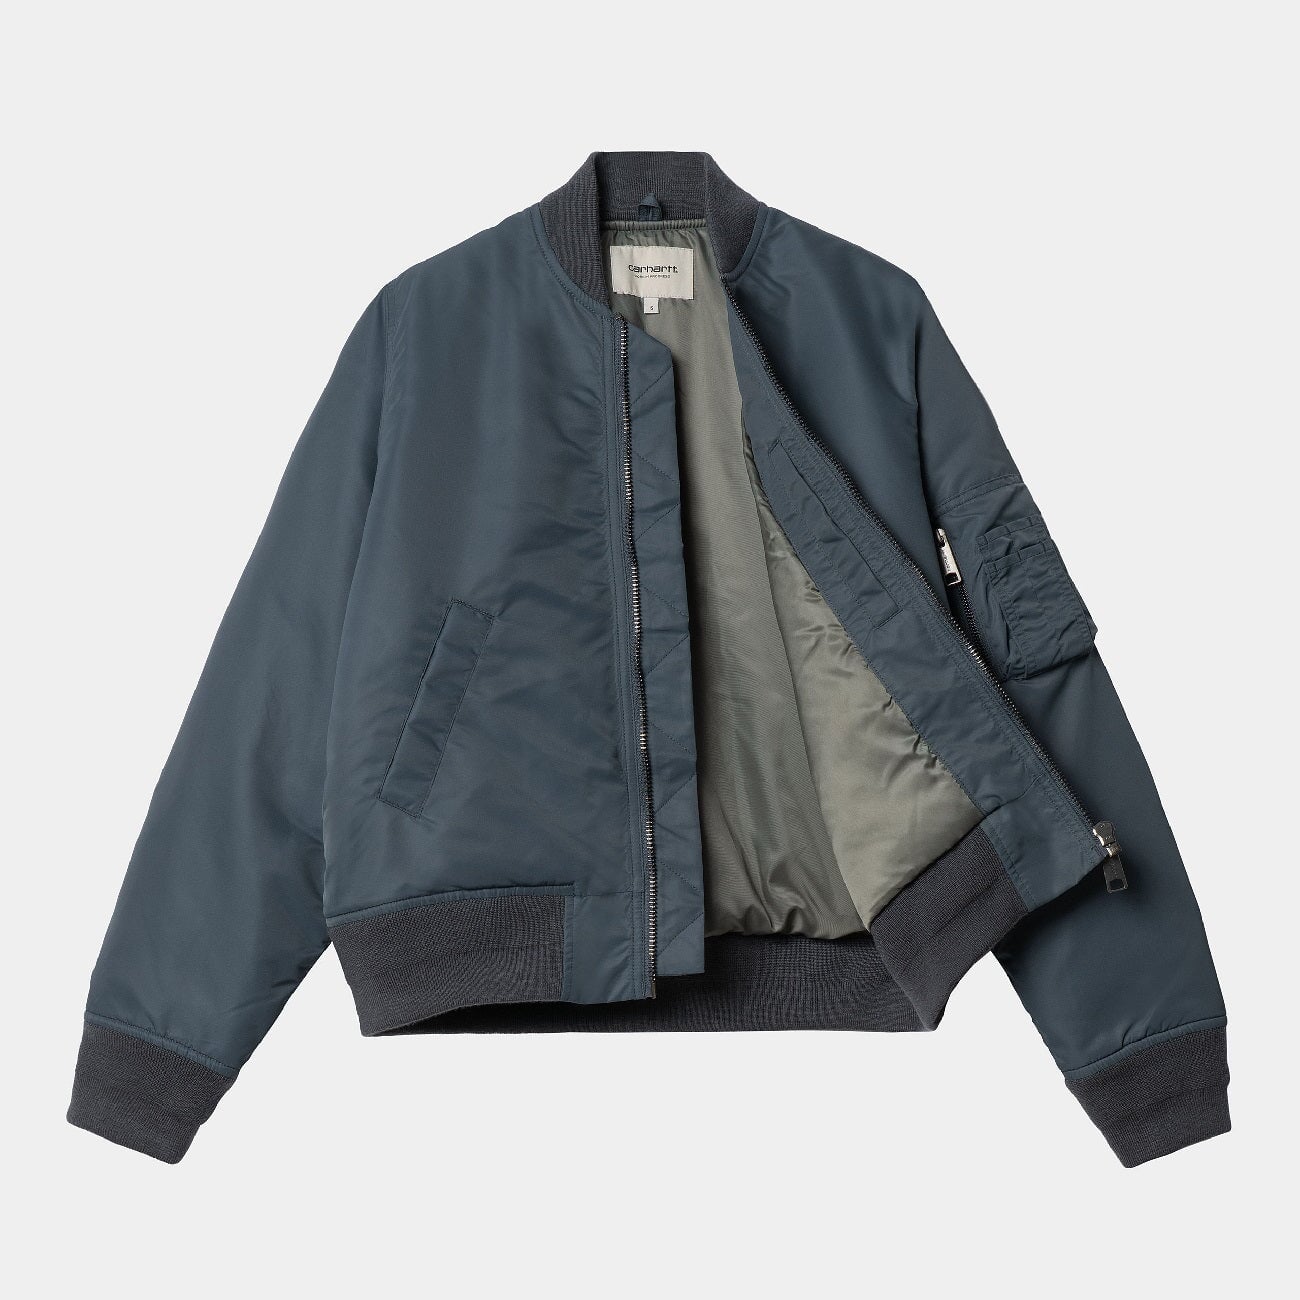 Carhartt Jacket: Durable Style and Functionality Combined插图1